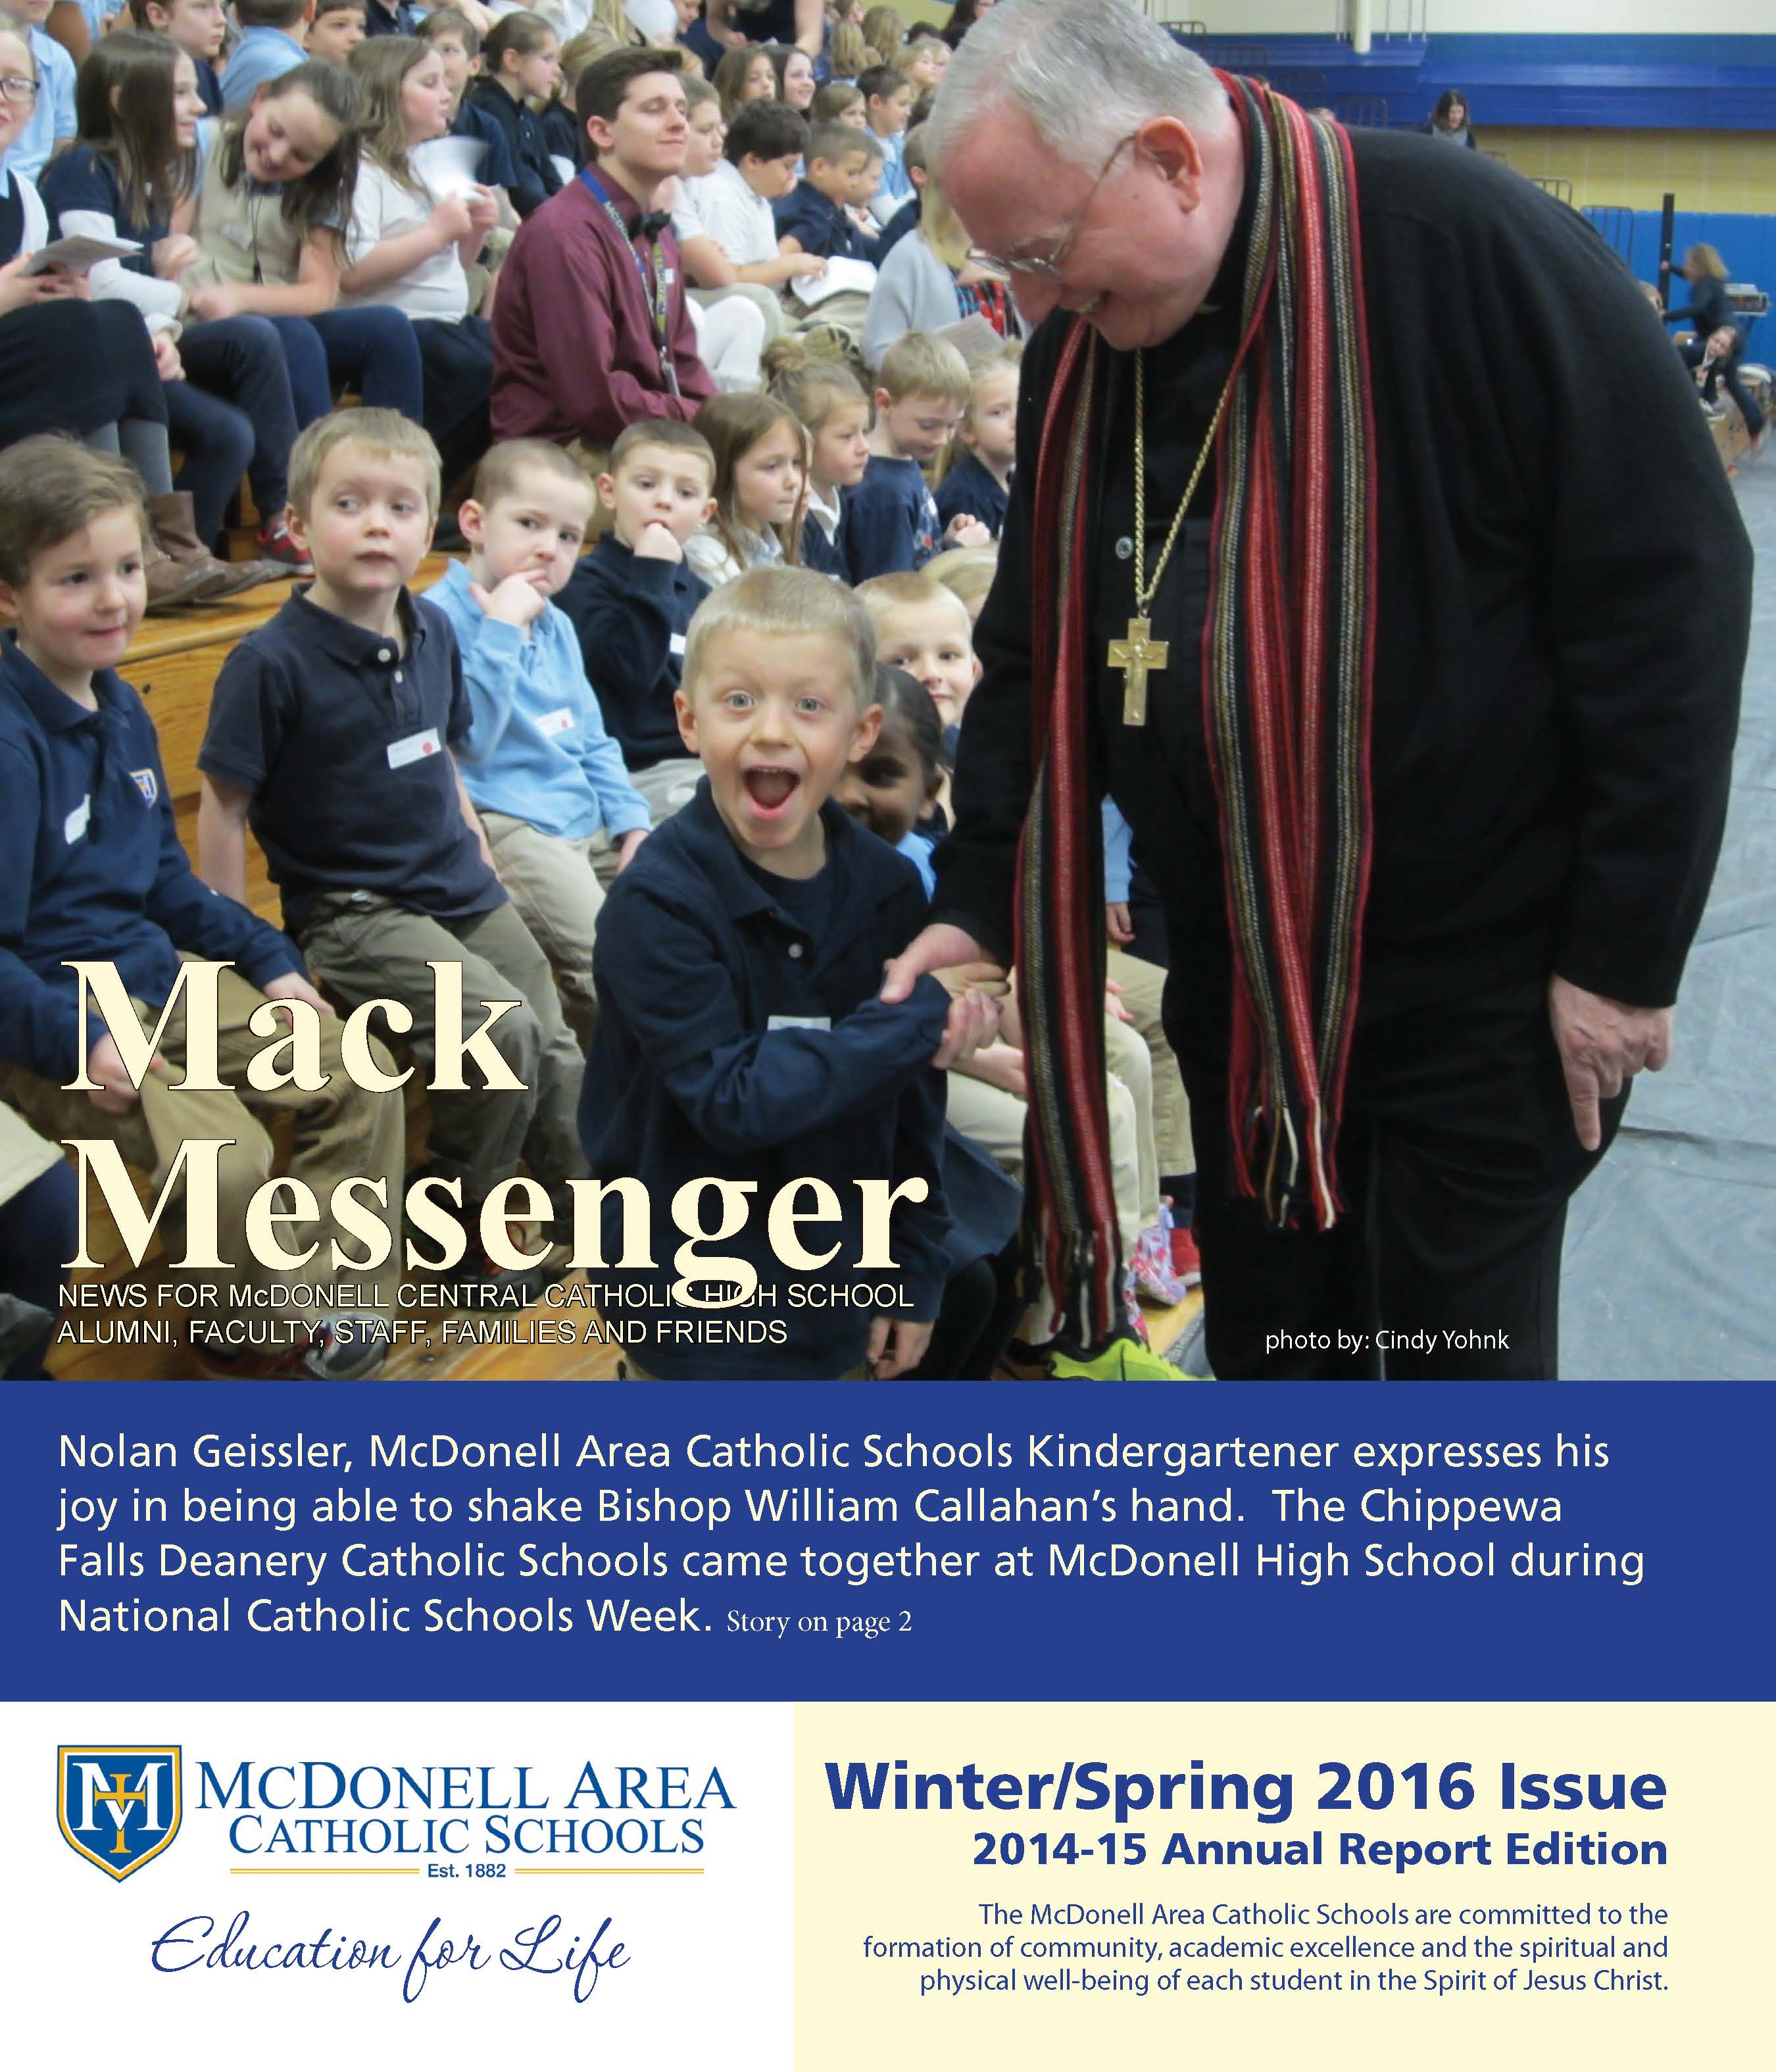 Mack Messenger Annual Report Issue